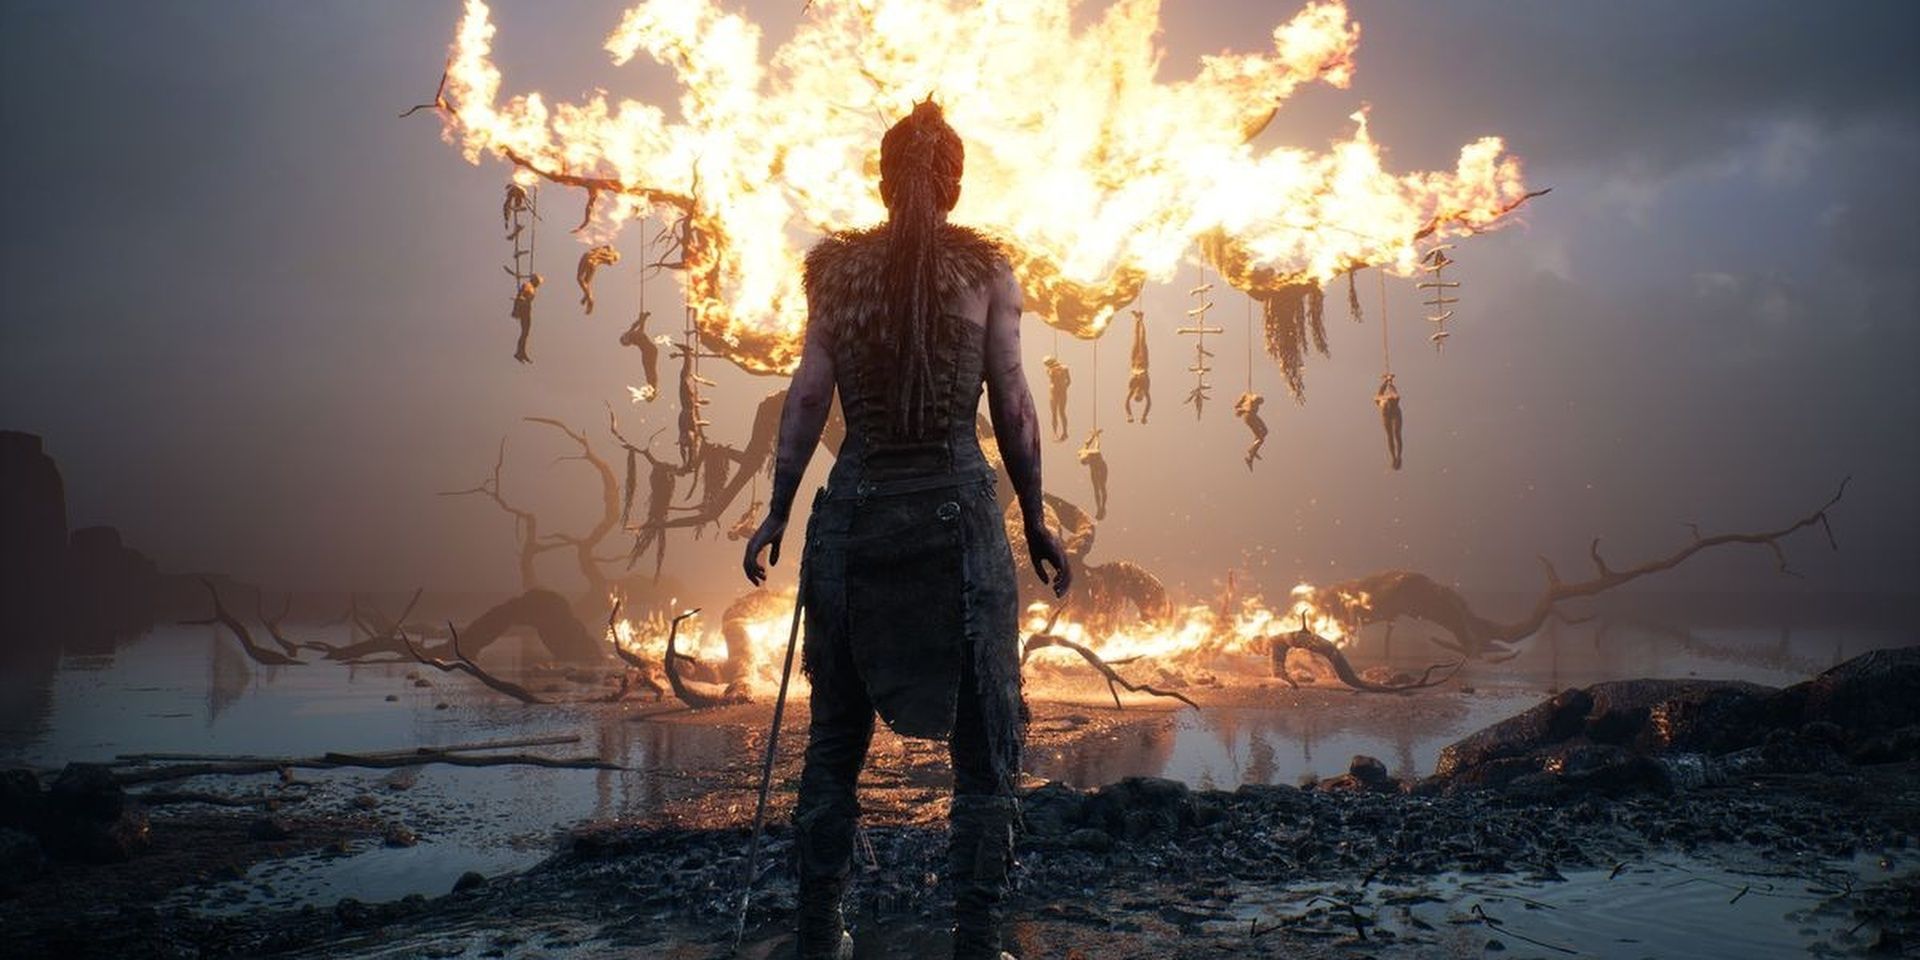 Senua from Hellblade - Senua's Sacrifice standing in front of a burning tree